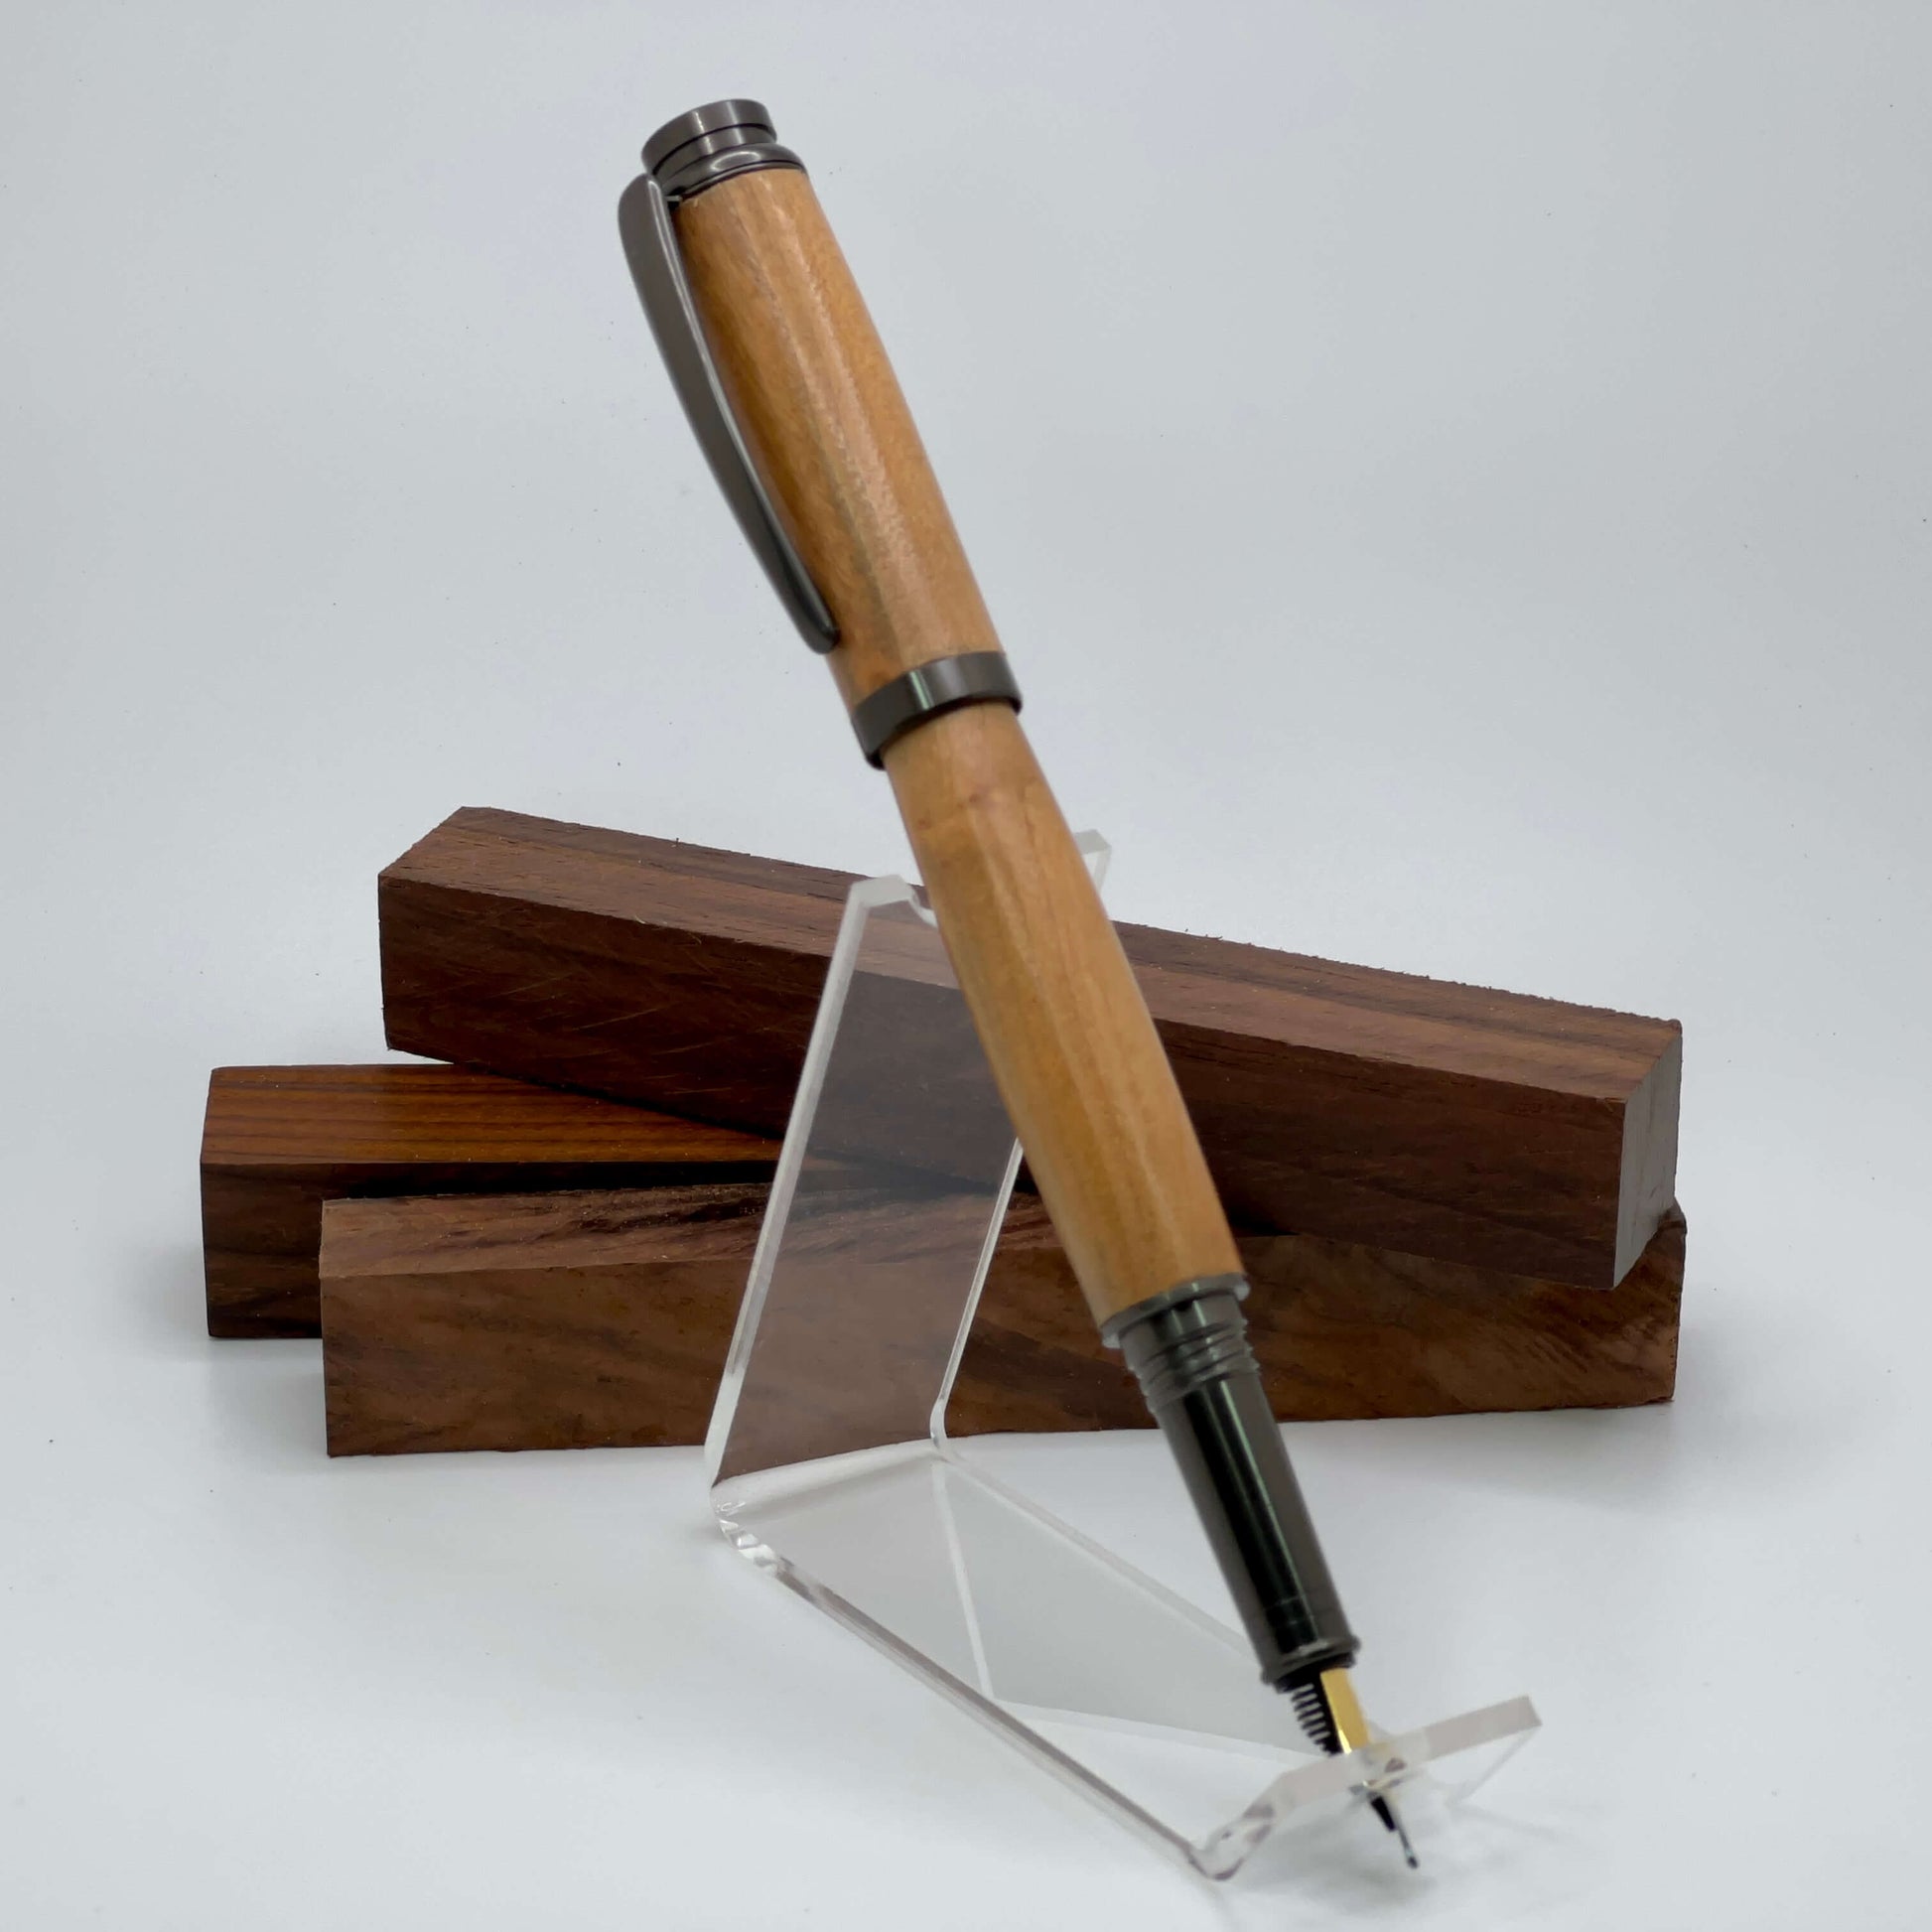 Handcrafted pen with cherry wood and satin gunmetal hardware fountain pen cap posted 